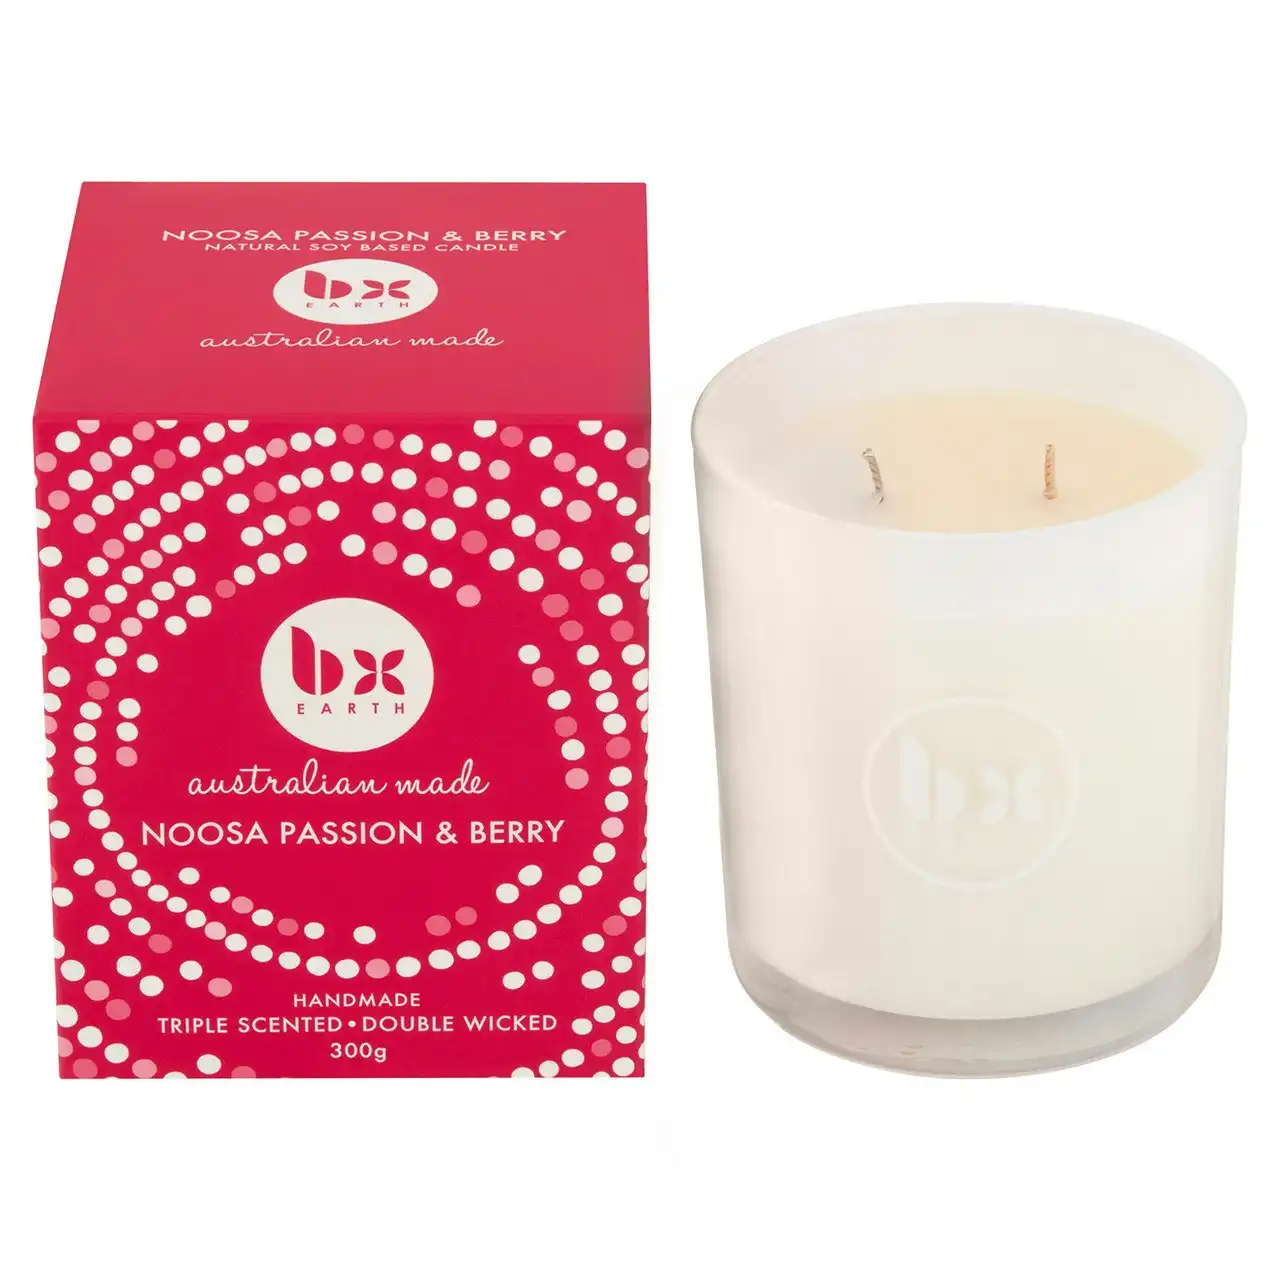 BX Earth Noosa Passion & Berry Candle 300g